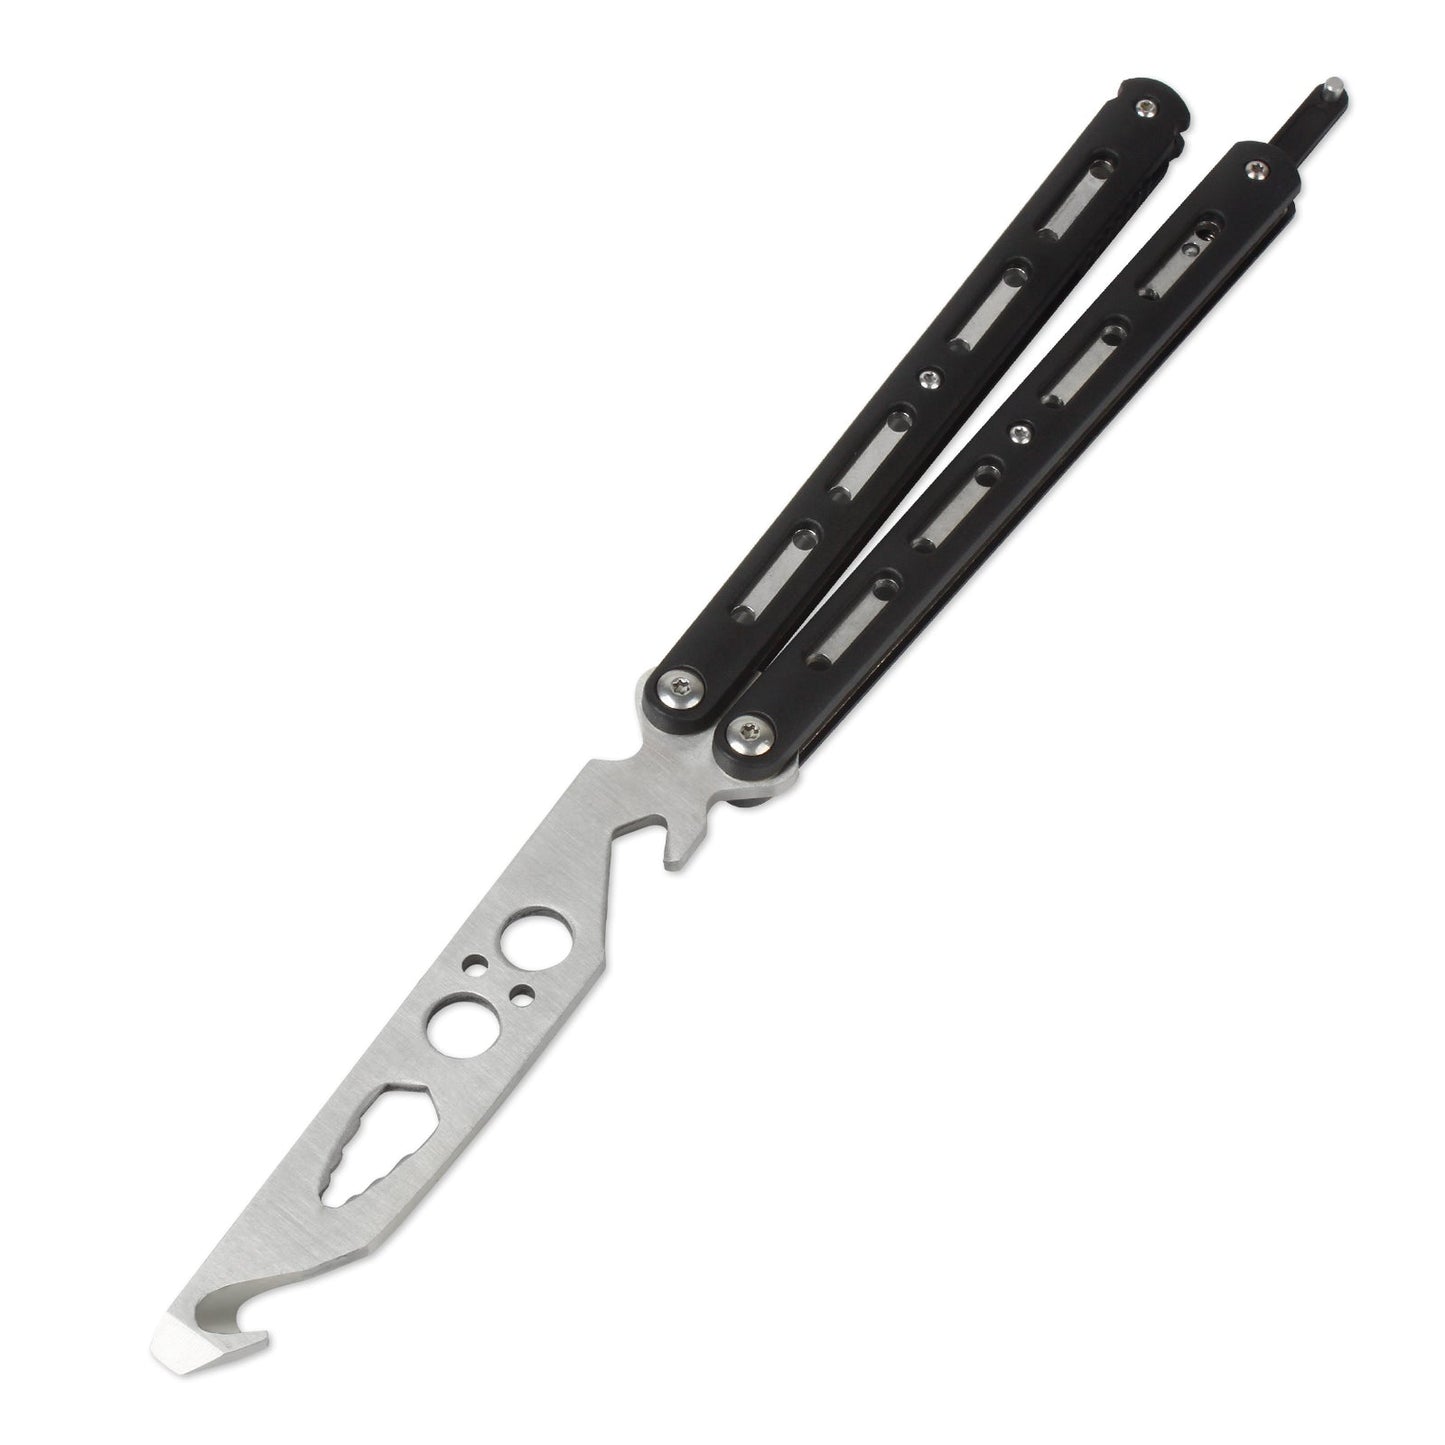 Andux Balisong Butterfly Knife Balisong Butterfly Knife Bottle Opener Tool Stainless Steel Carry-on Hook Folding Multitool Black BLCS554